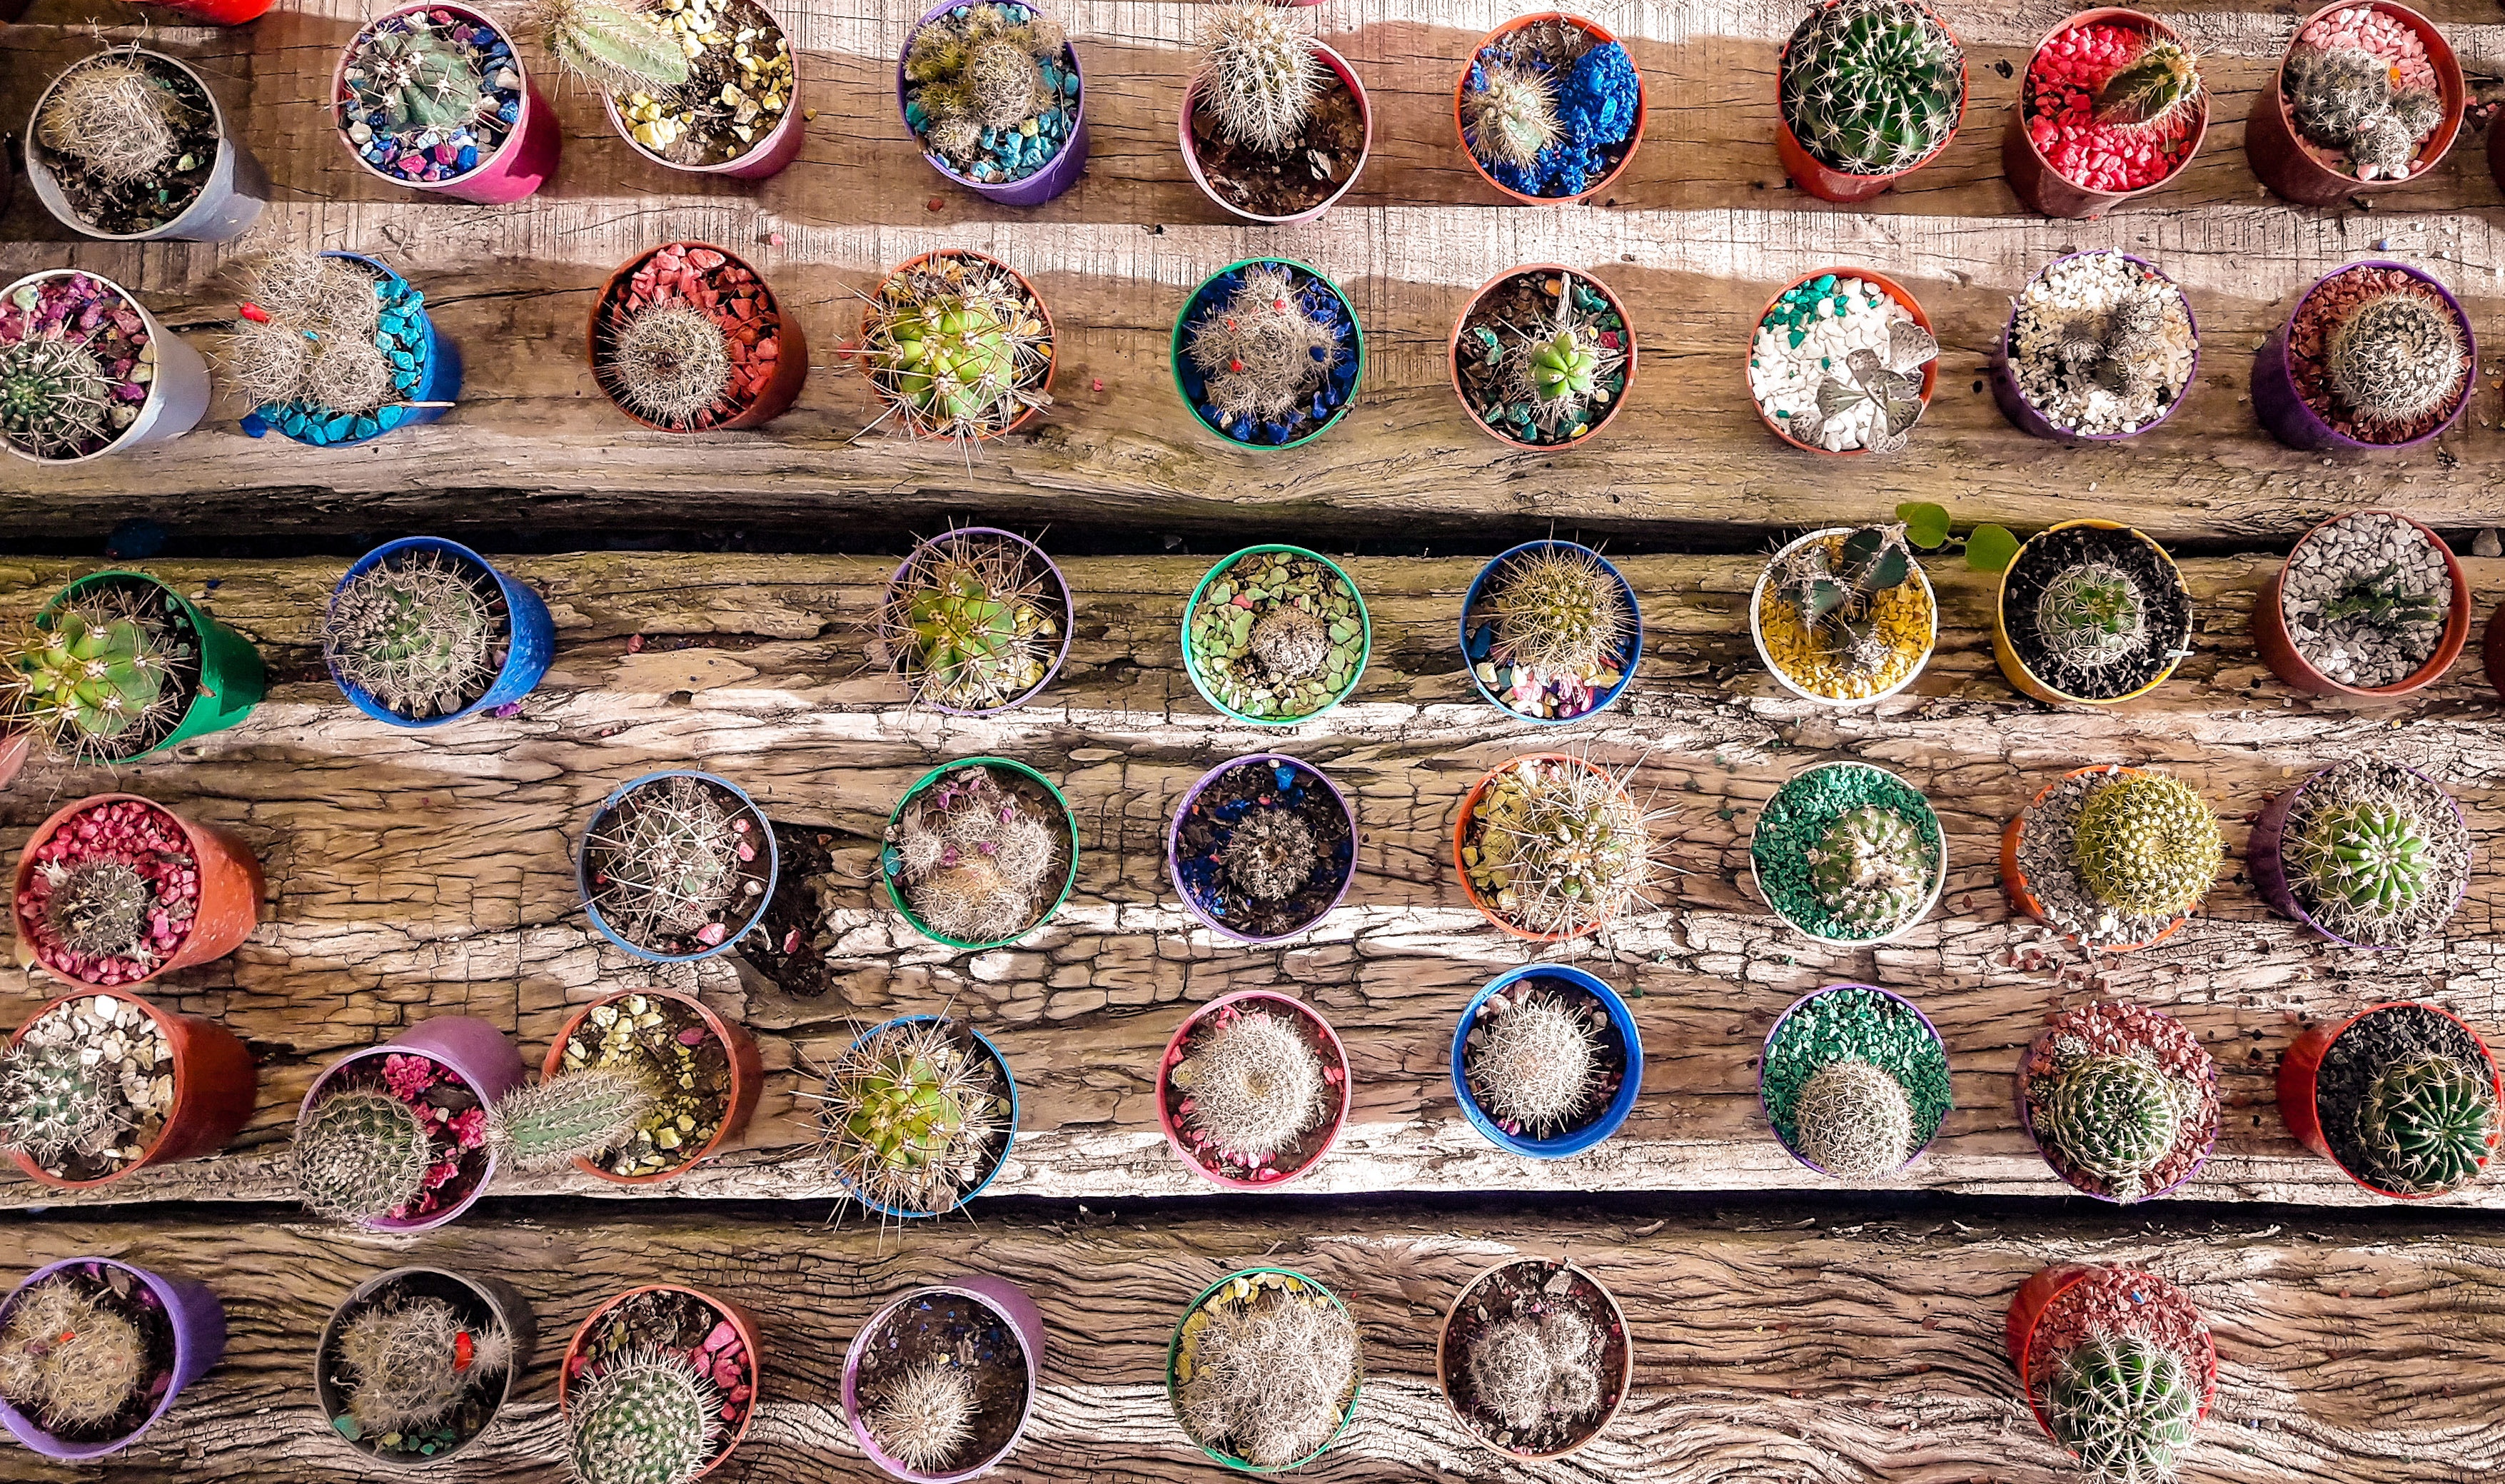 Many cactuses symbolizing the choice of contacts